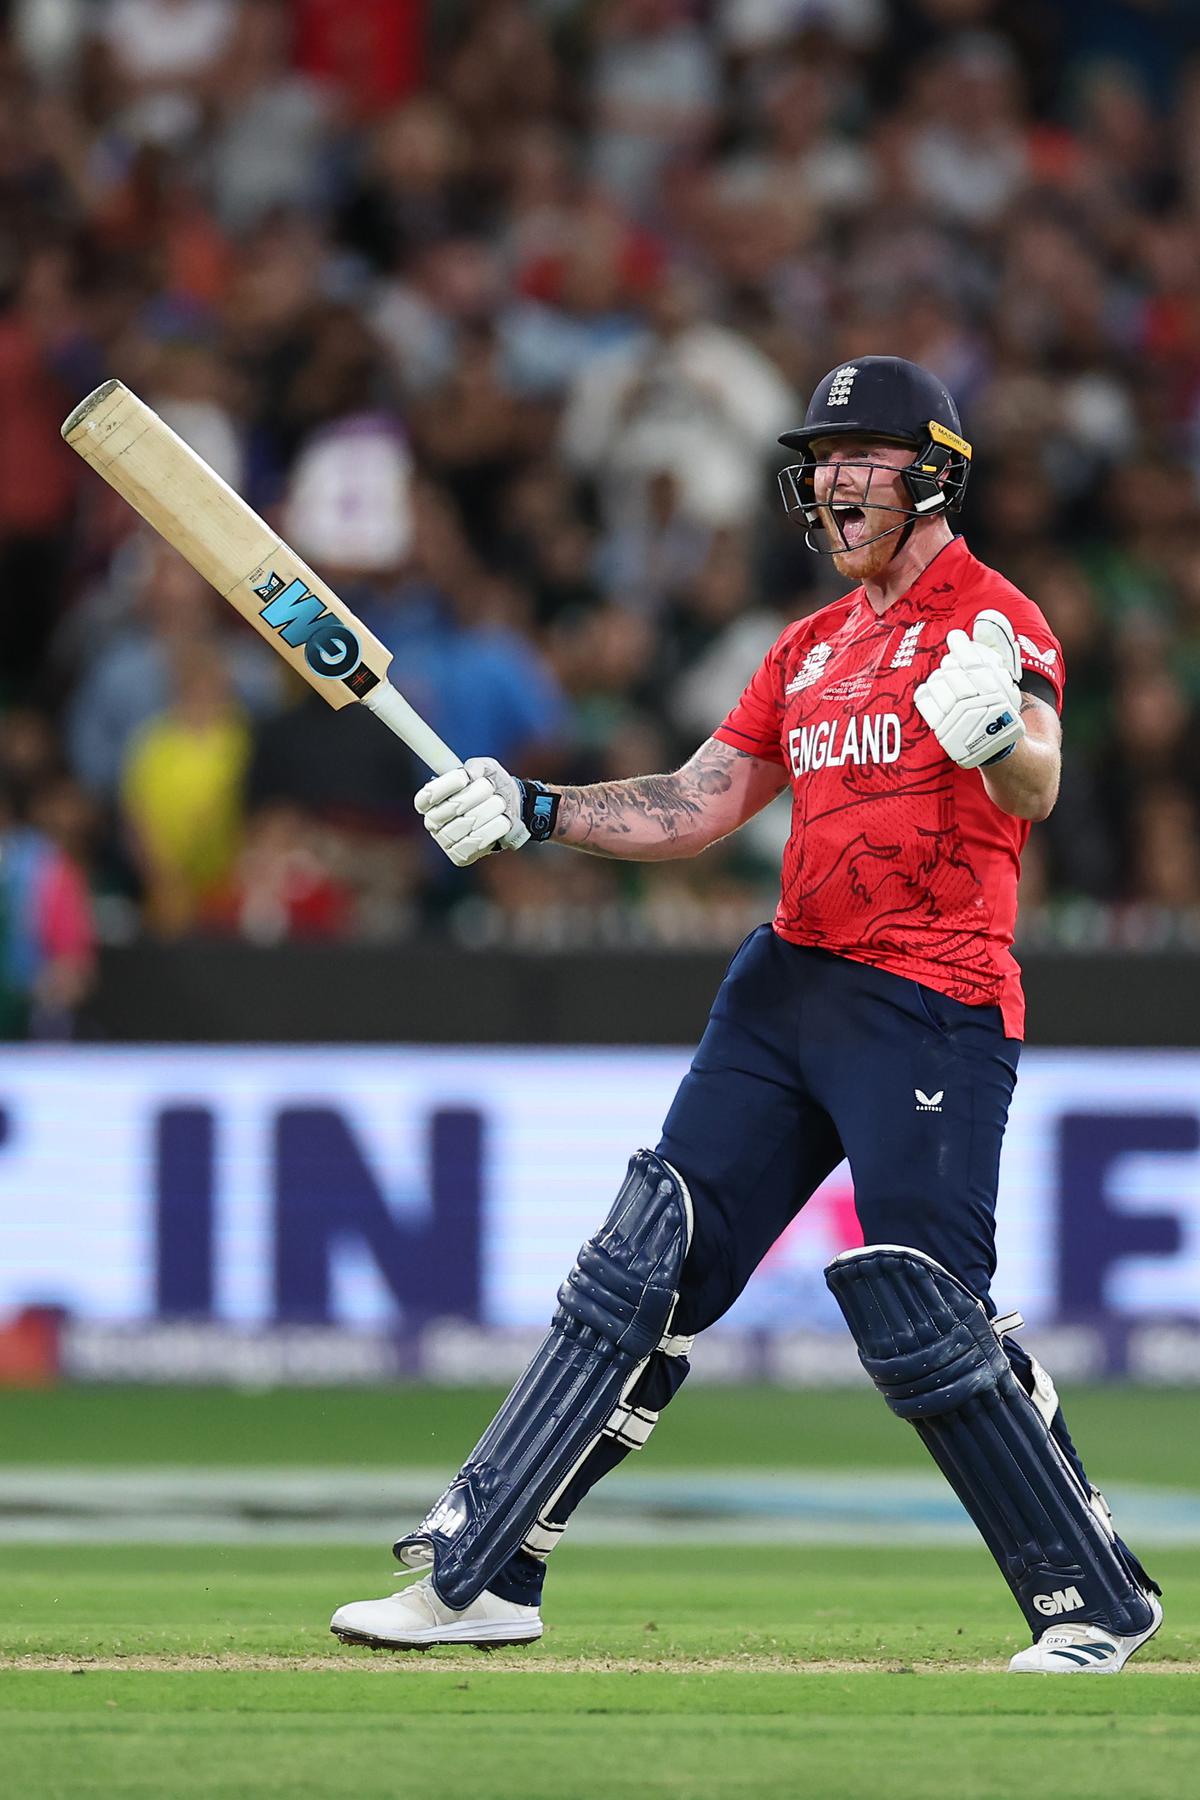 Fighter: Ben Stokes, despite not being at his fluent best, hung in there and delivered.